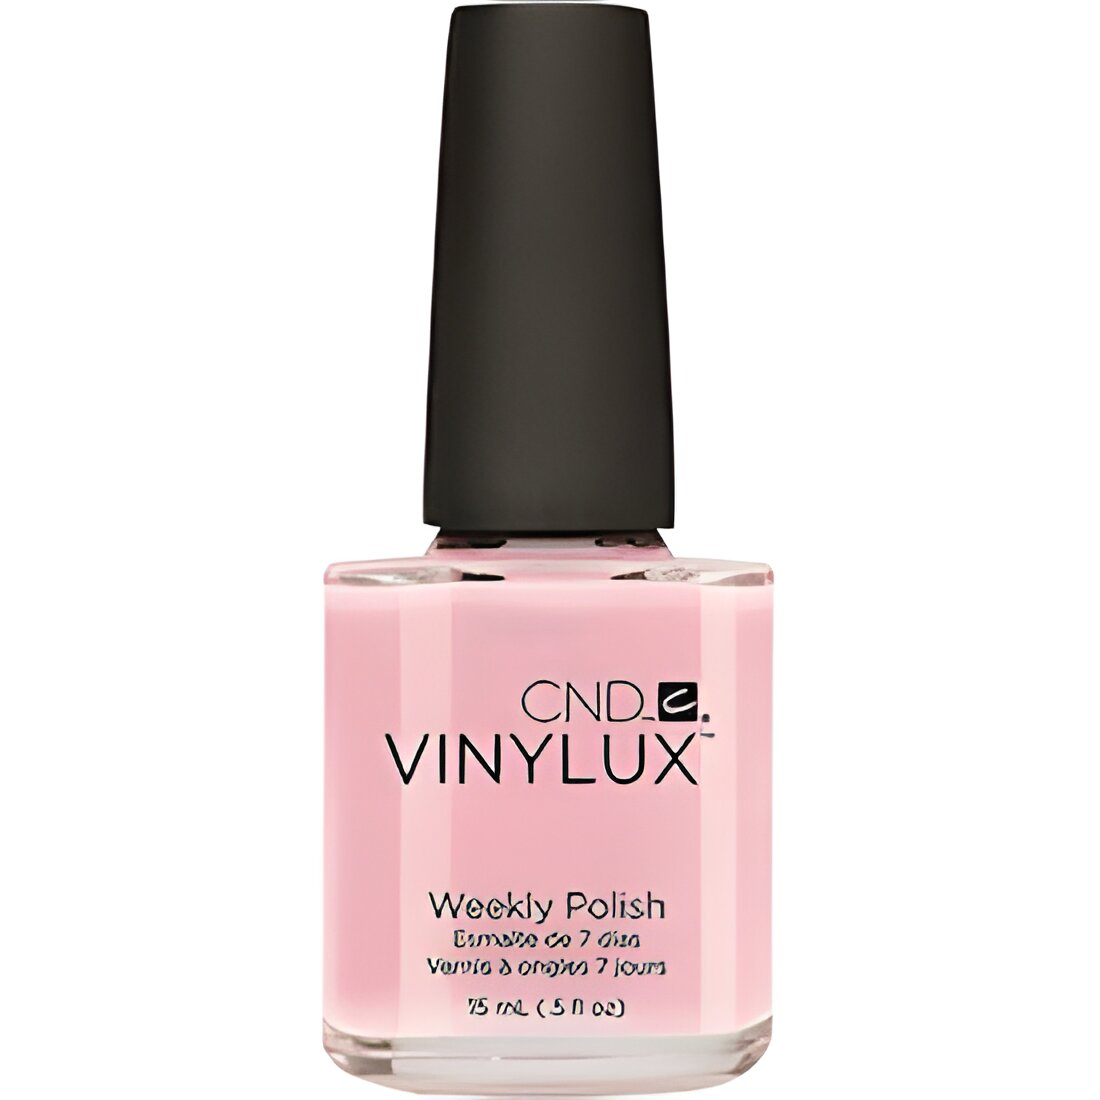 Free Nail Polish Samples For Passionate Bloggers